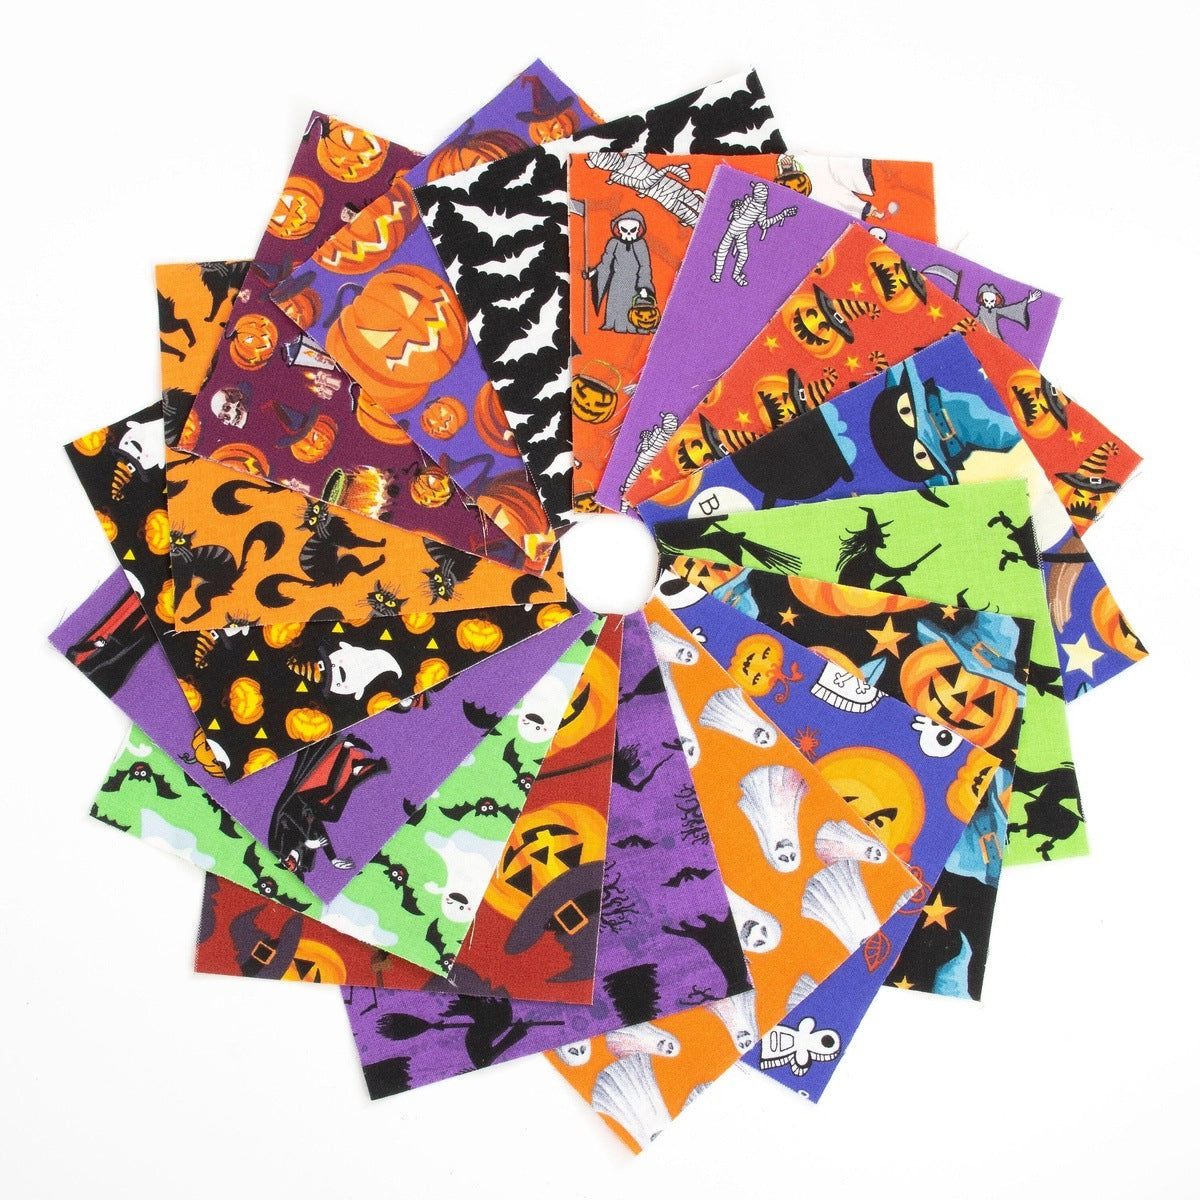 Halloween 1 Strip Roll pre cut strips quilt fabric 17 pieces 2.5 inch cotton